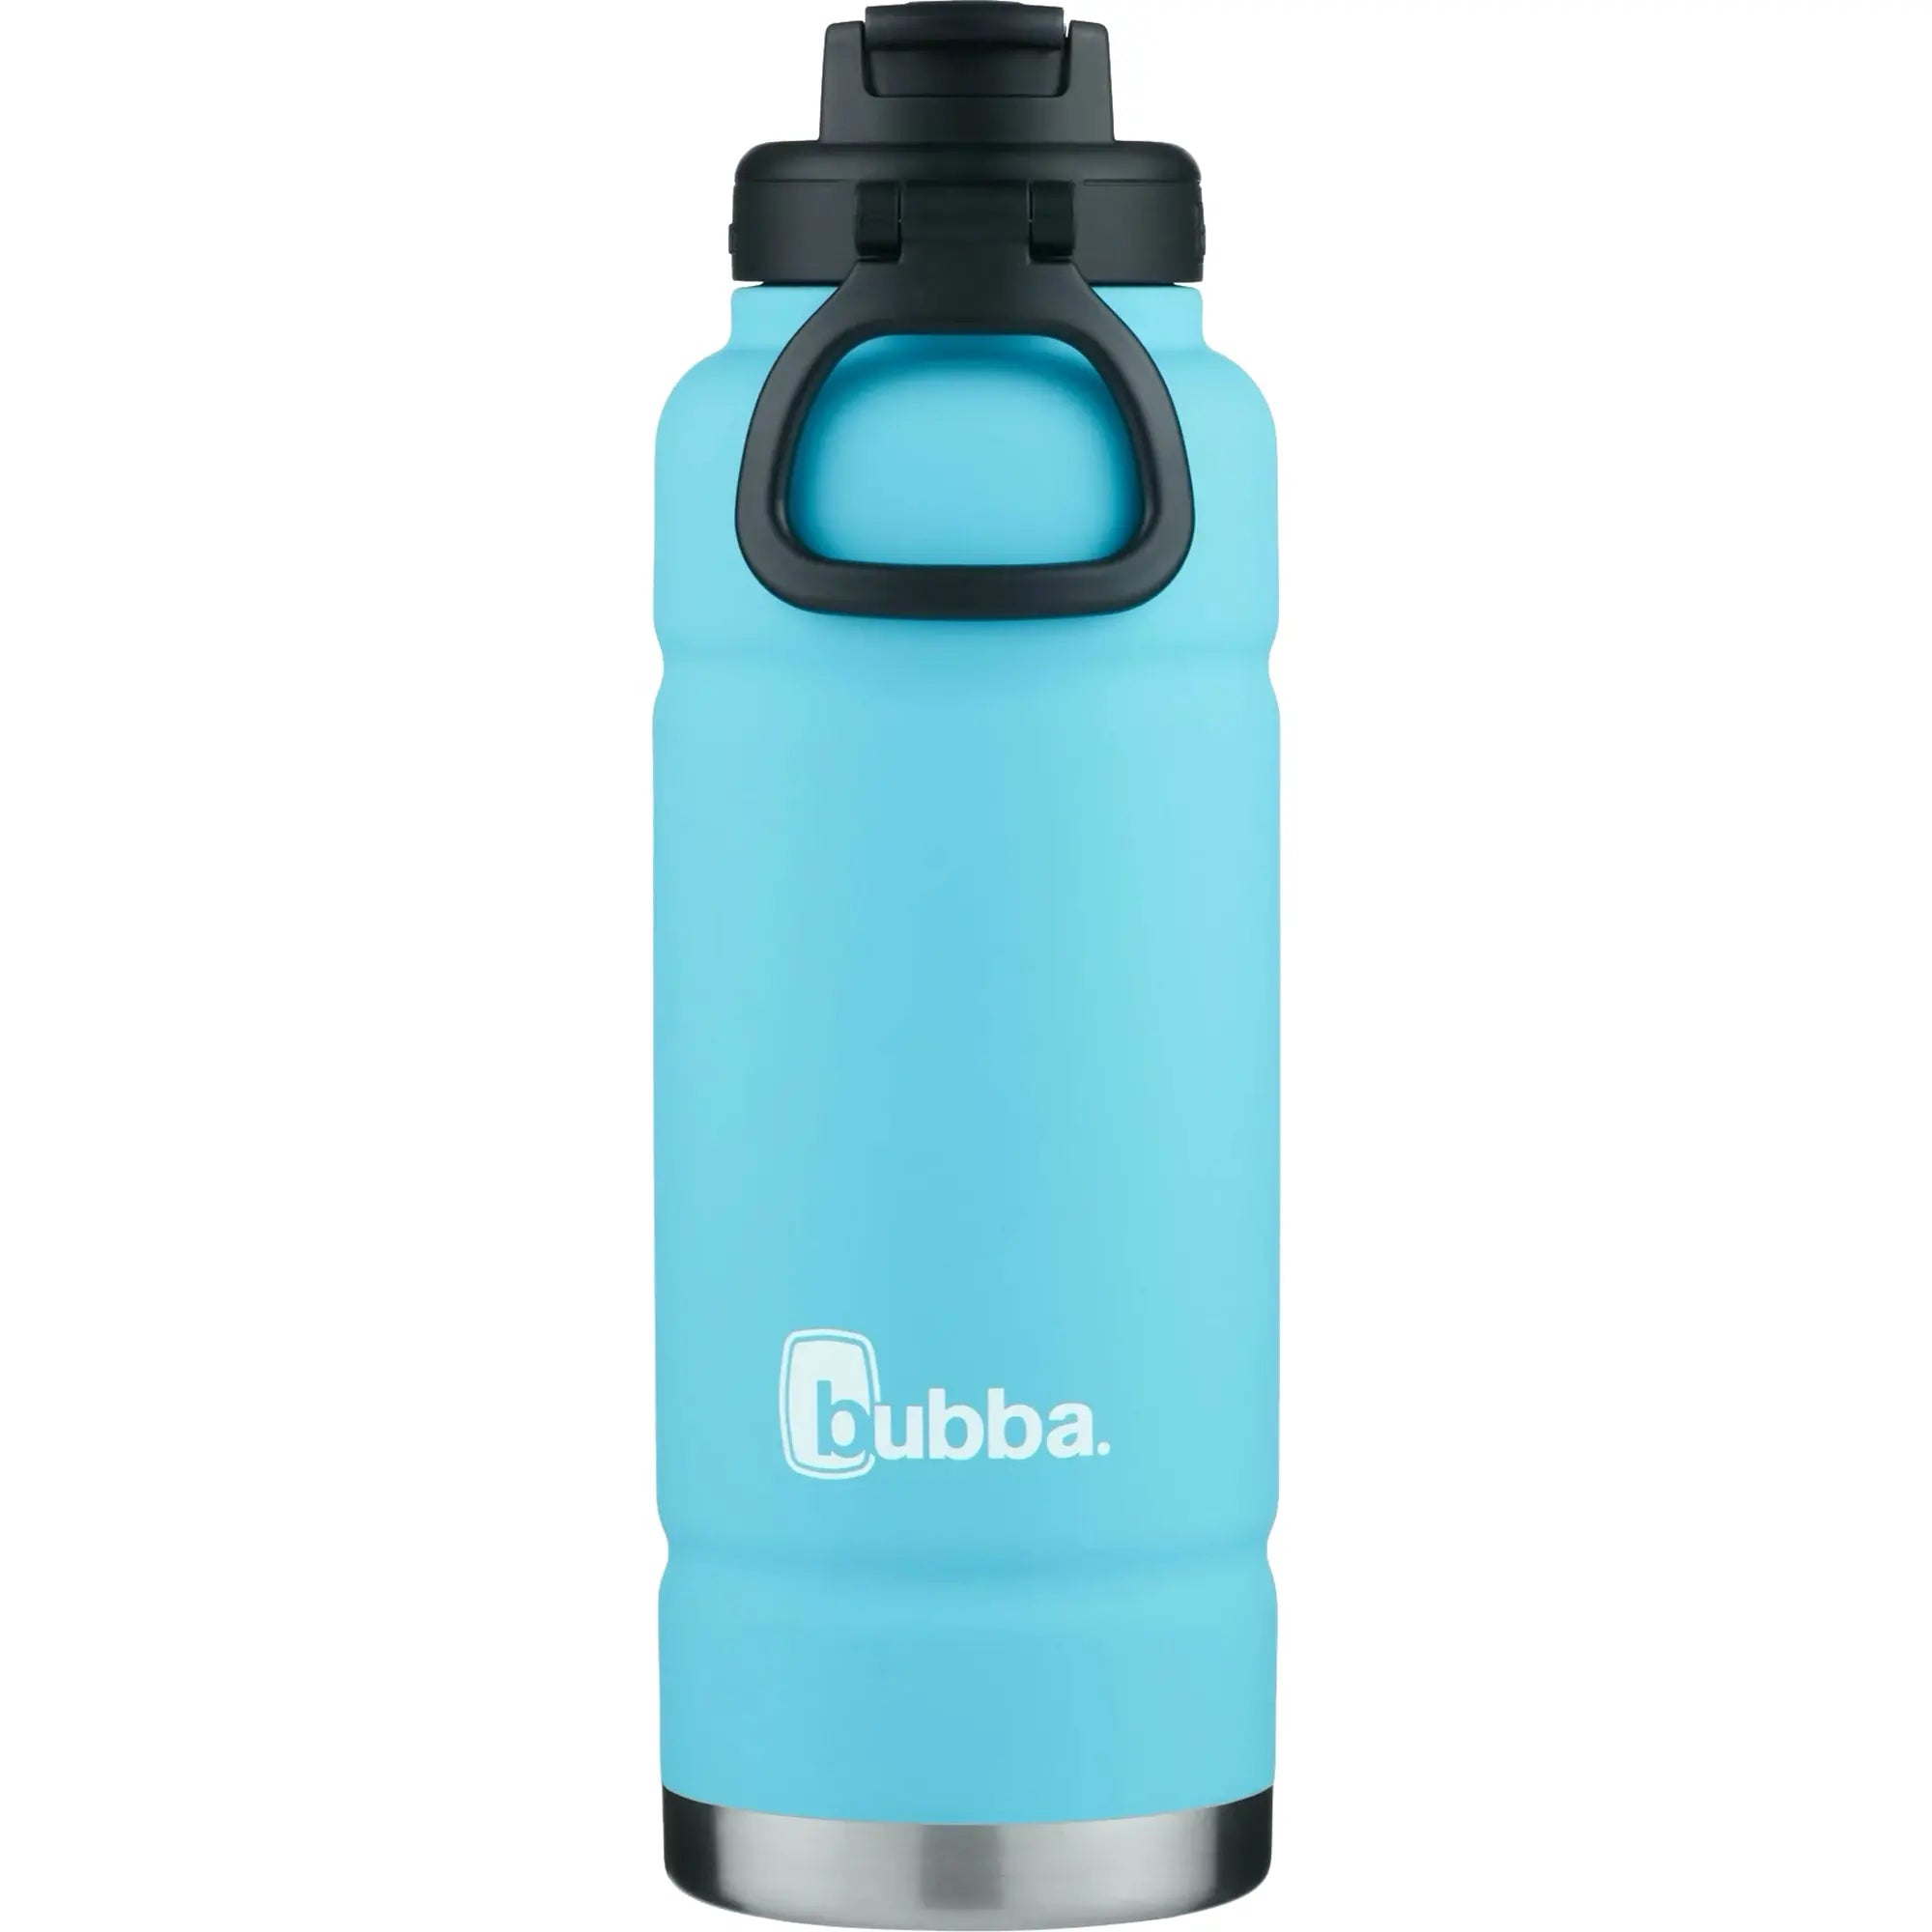 Bubba 40 oz. Trailblazer Insulated Stainless Steel Water Bottle - Island Teal Bubba